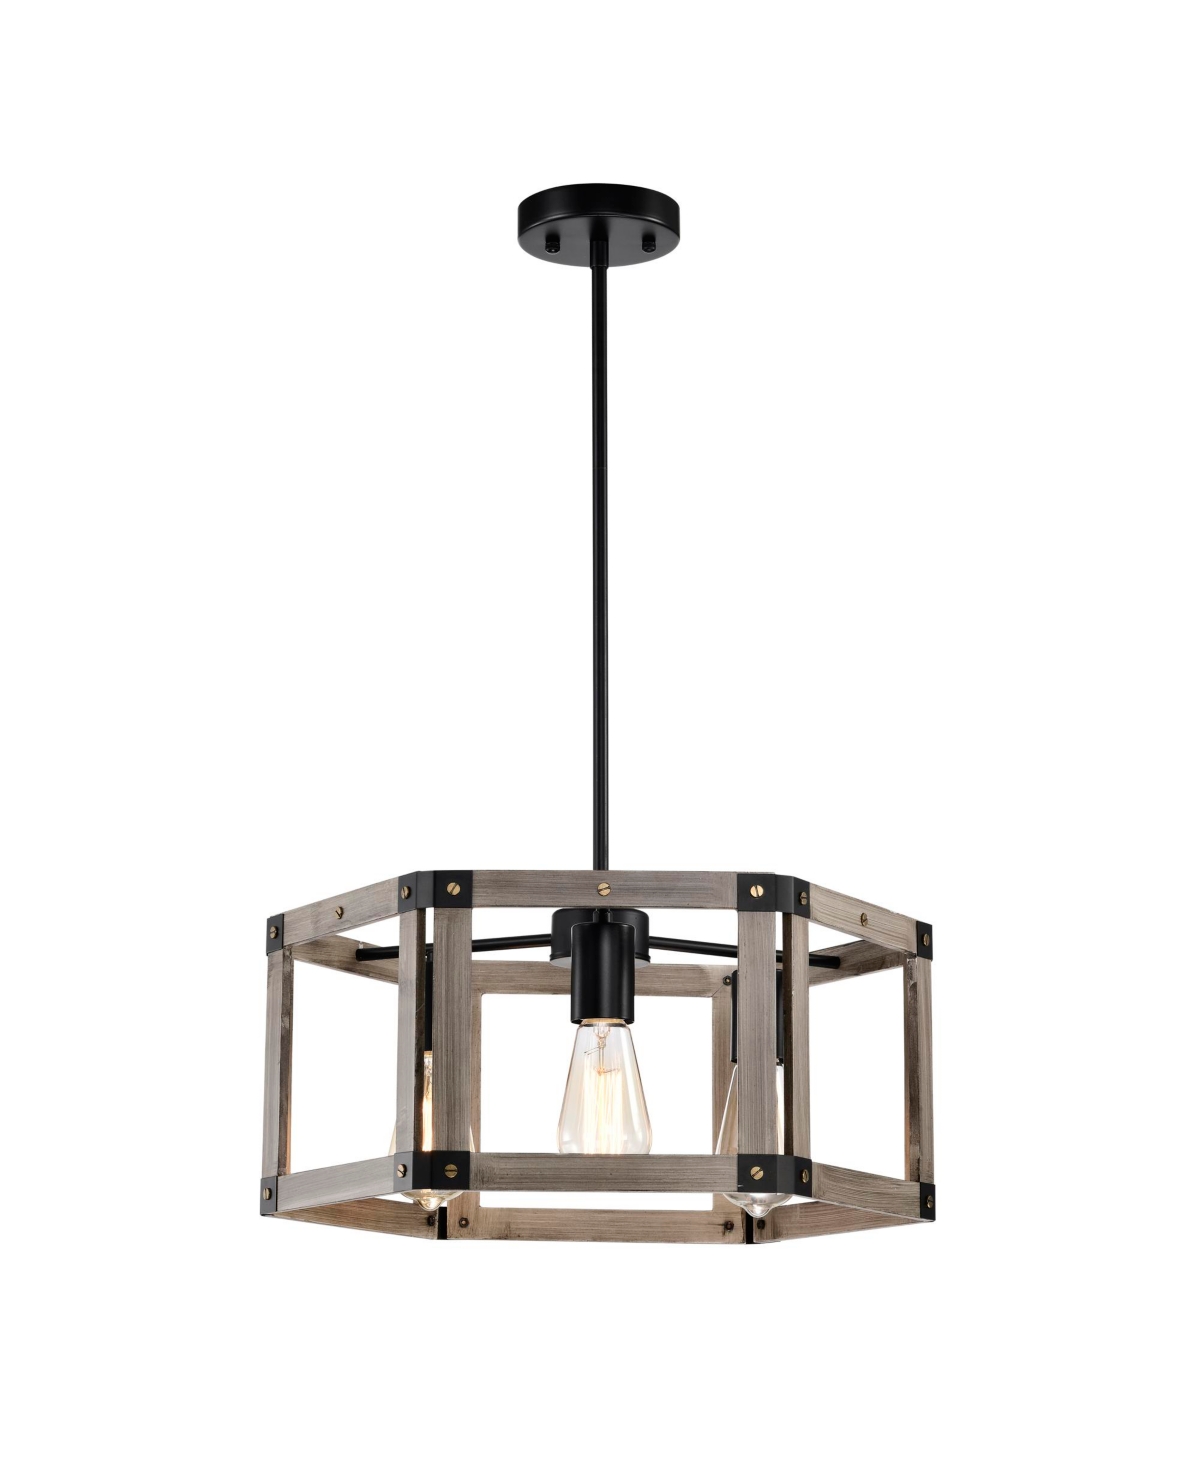 Home Accessories Malli 19" 3-light Indoor Finish Chandelier With Light Kit In Matte Black And Faux Wood Grain